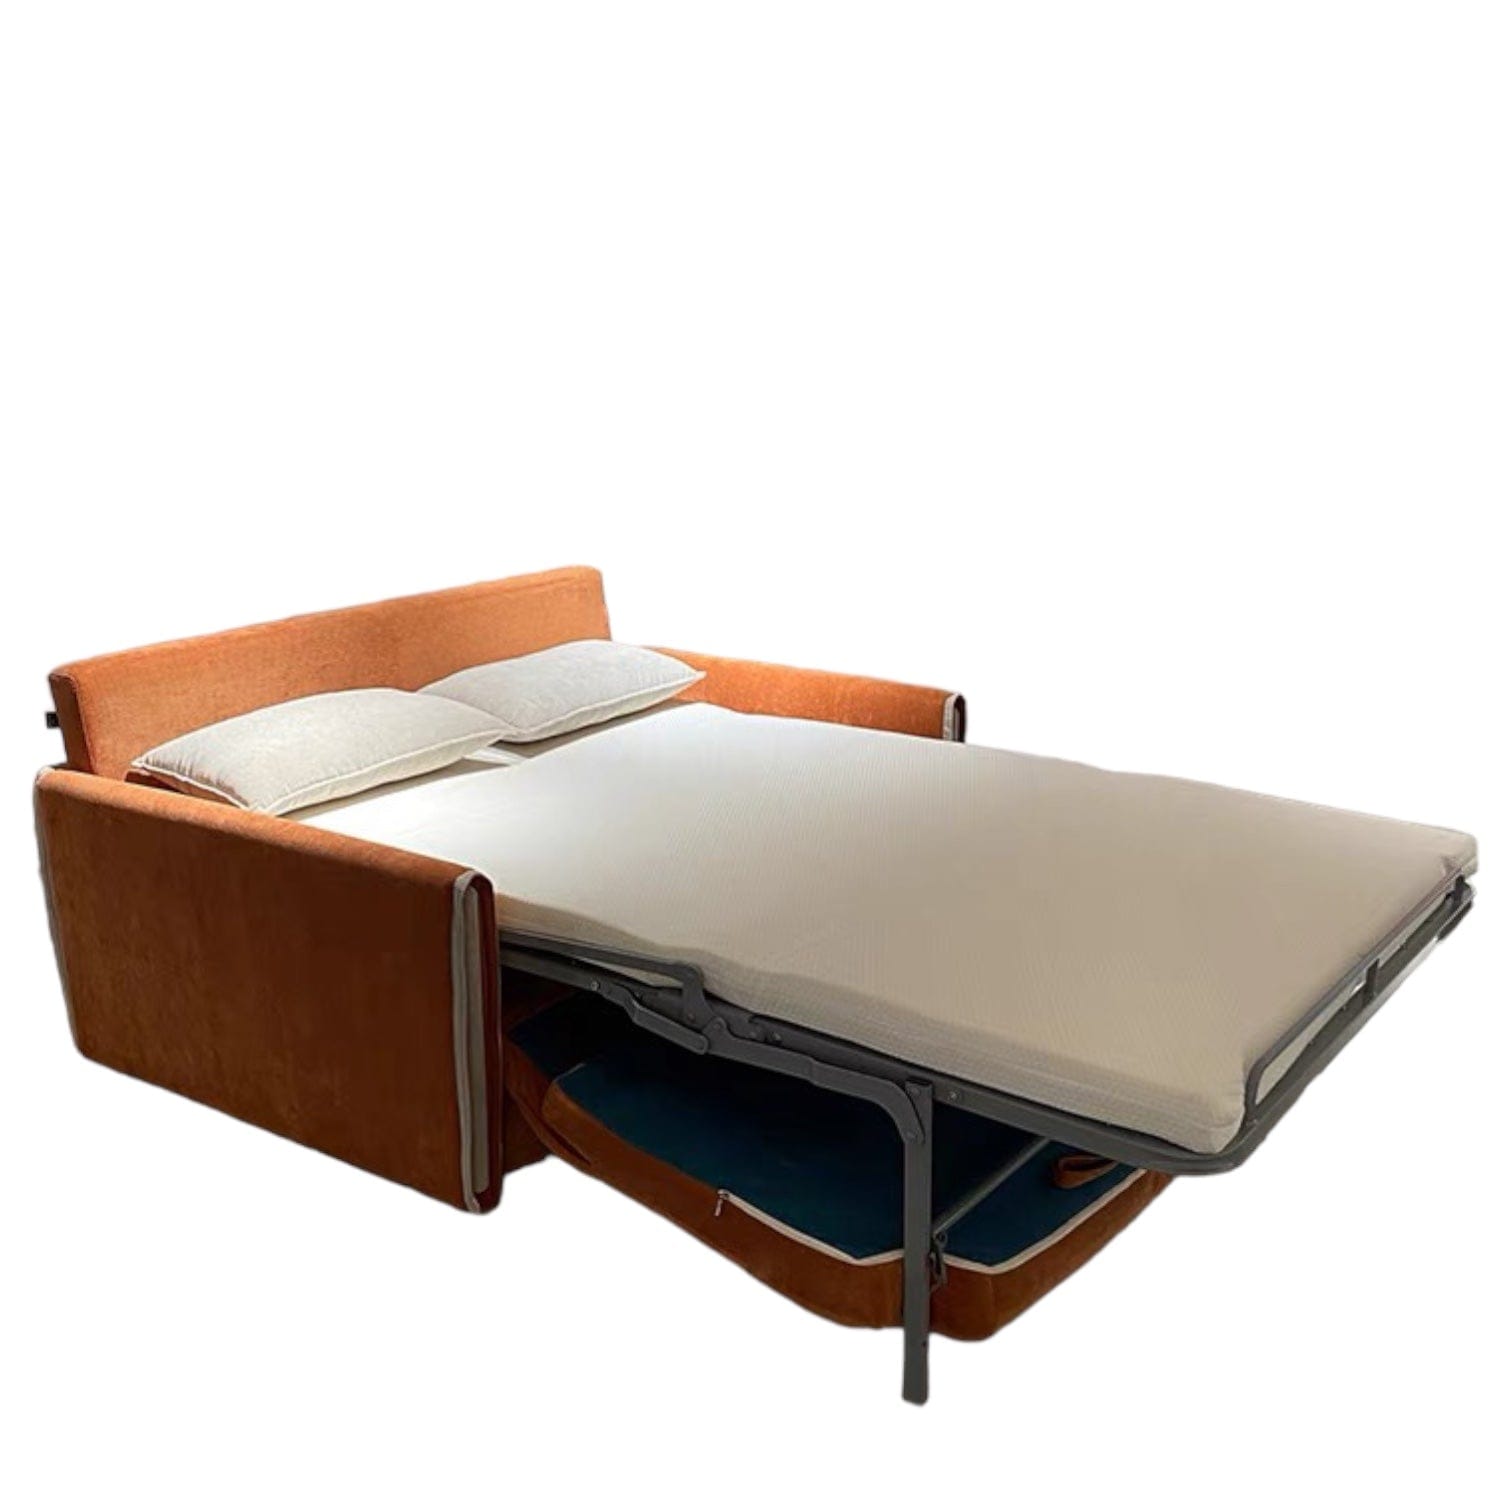 Home Atelier Normanton Foldable Sofa Bed